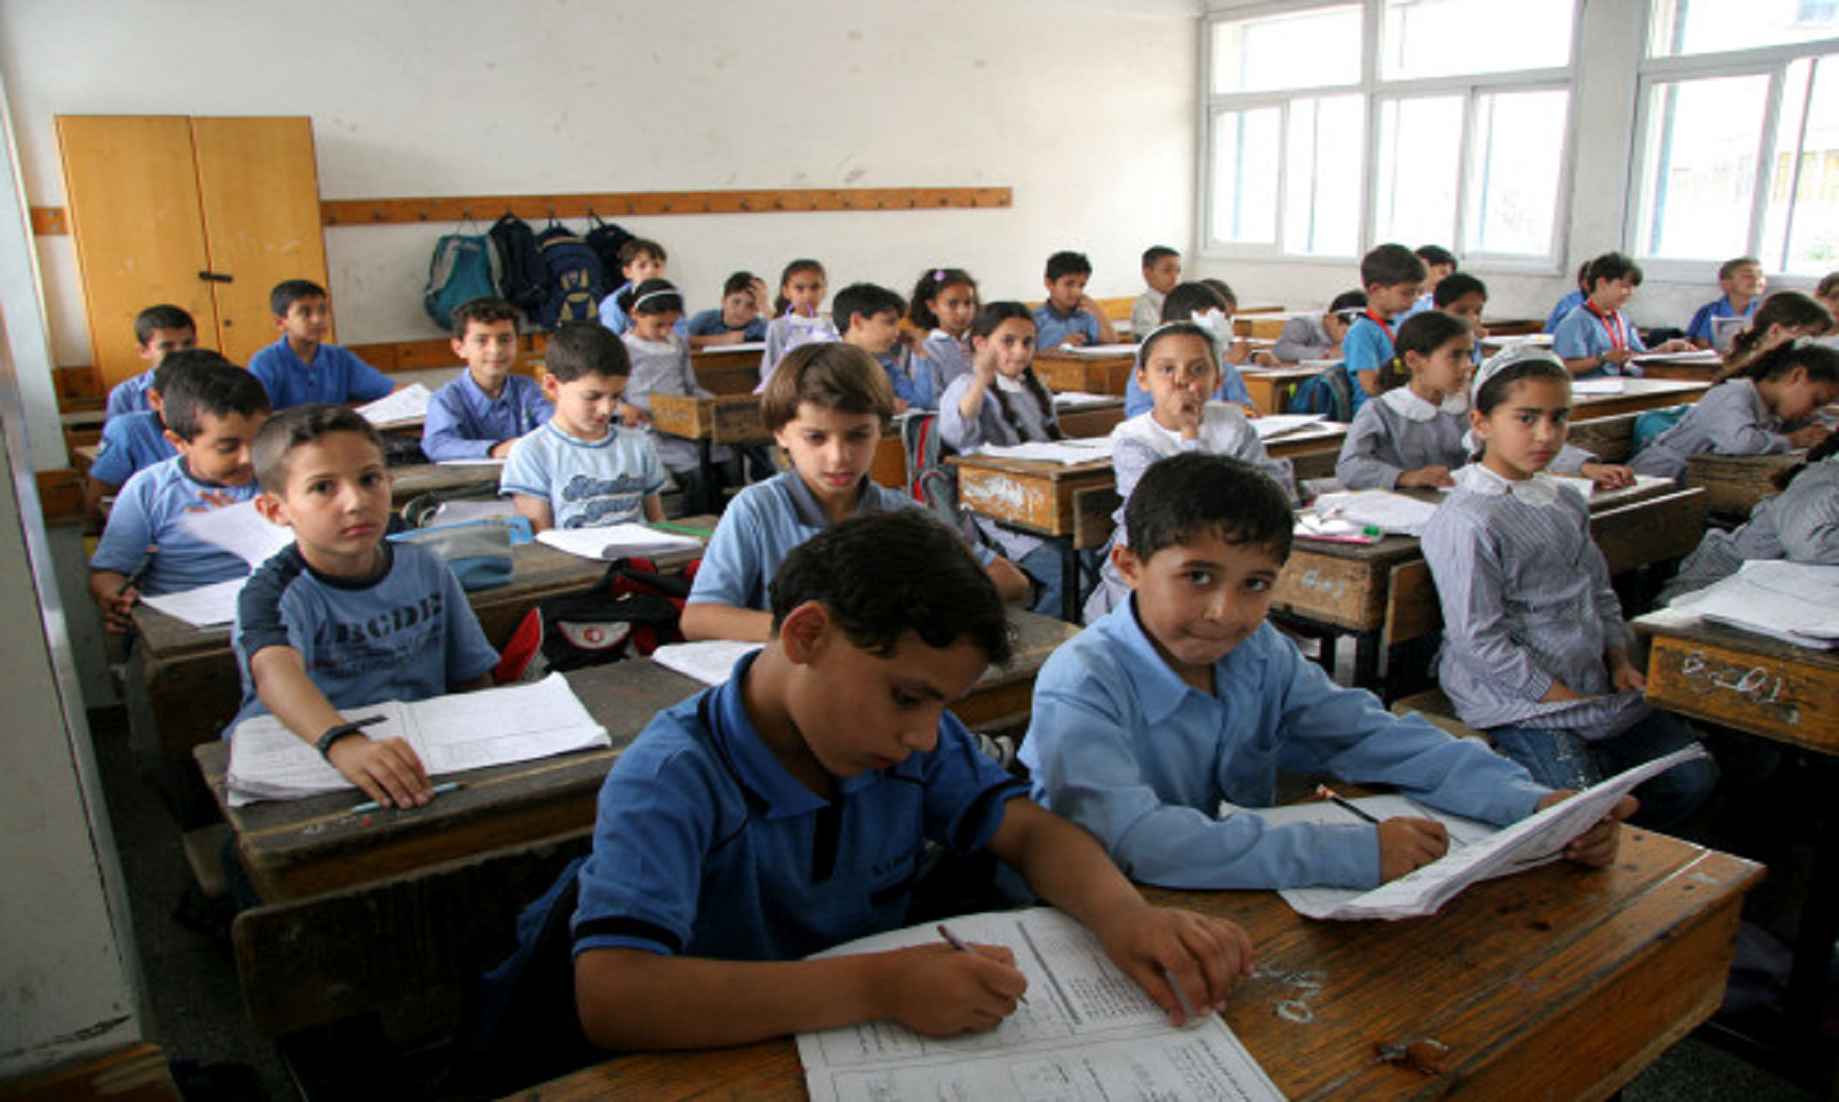 Schools In Palestine To Resume In Sept: Minister